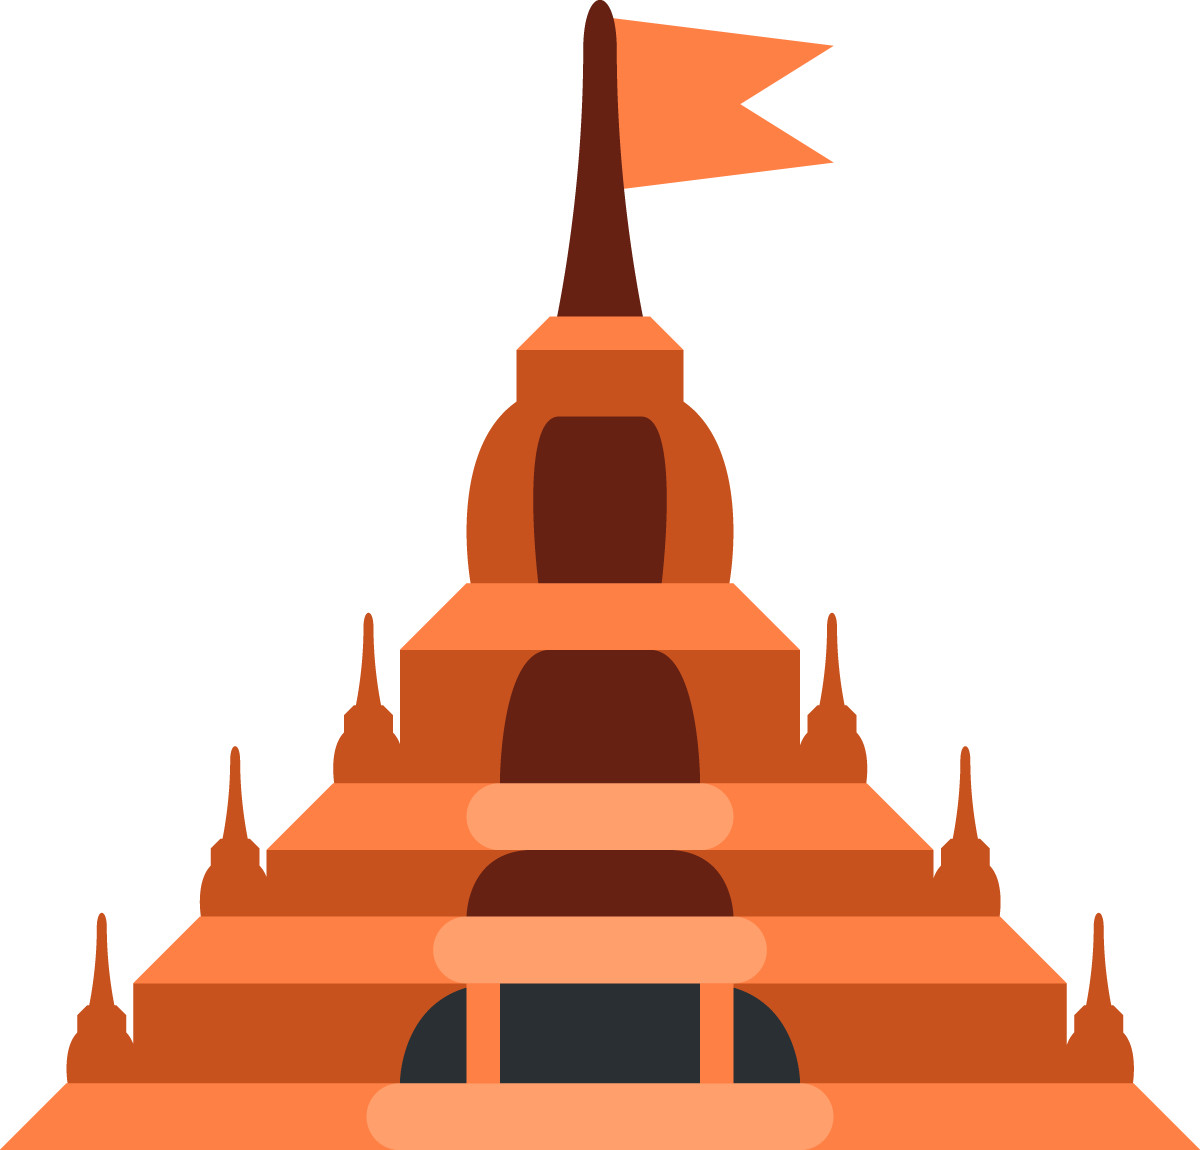 Twitter emoji of a Hindu temple, with an orange flag at the top.